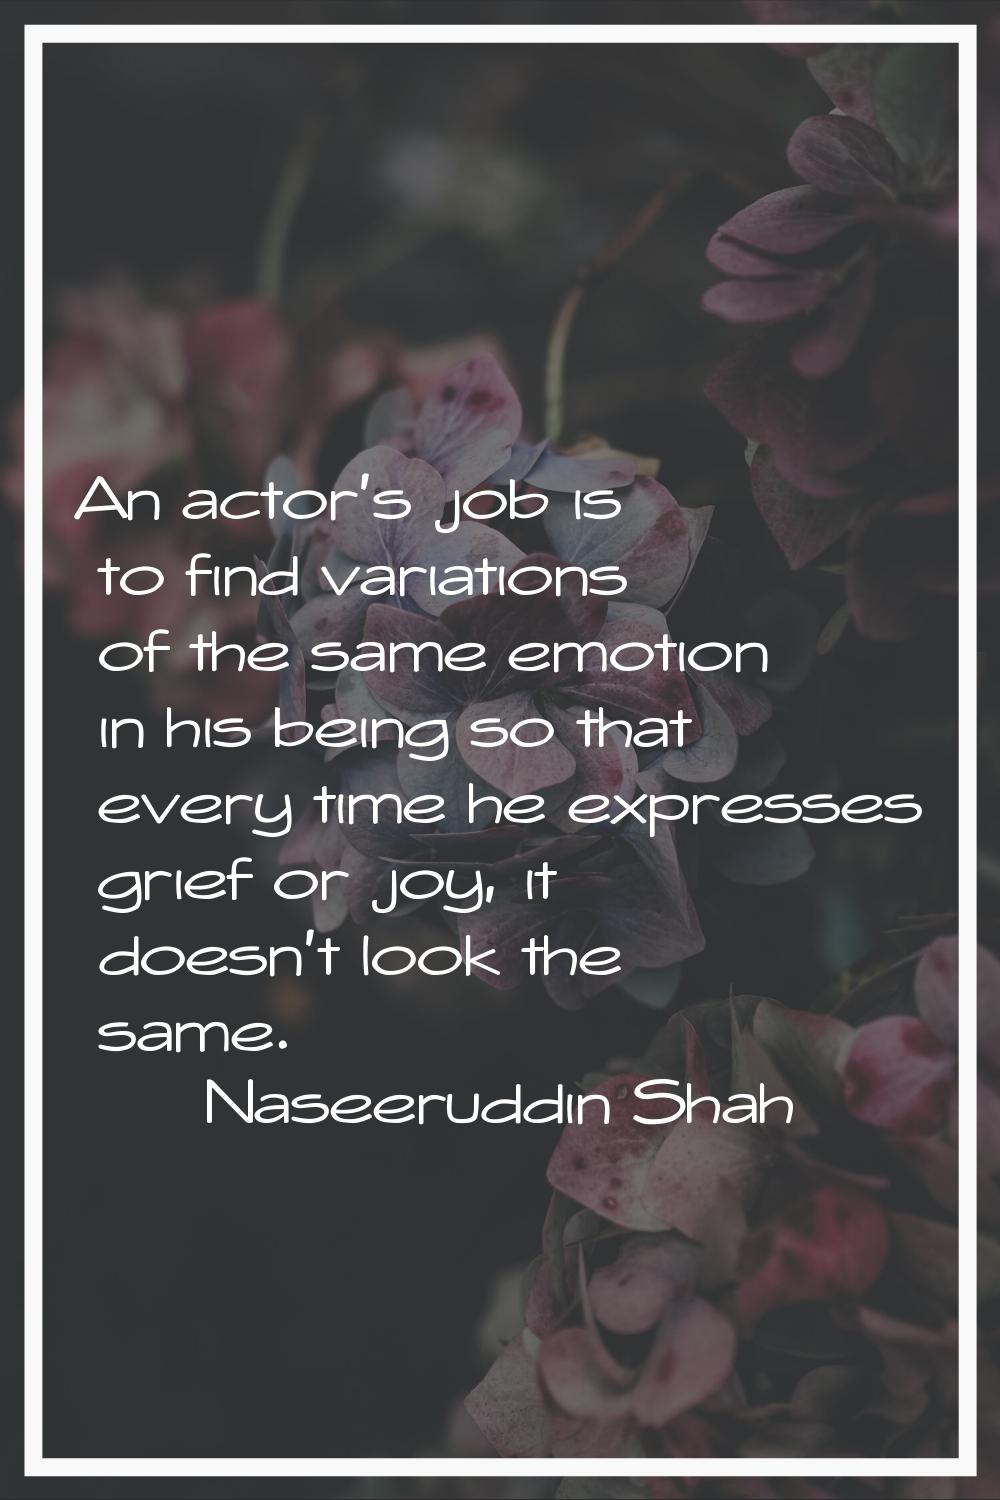 An actor's job is to find variations of the same emotion in his being so that every time he express